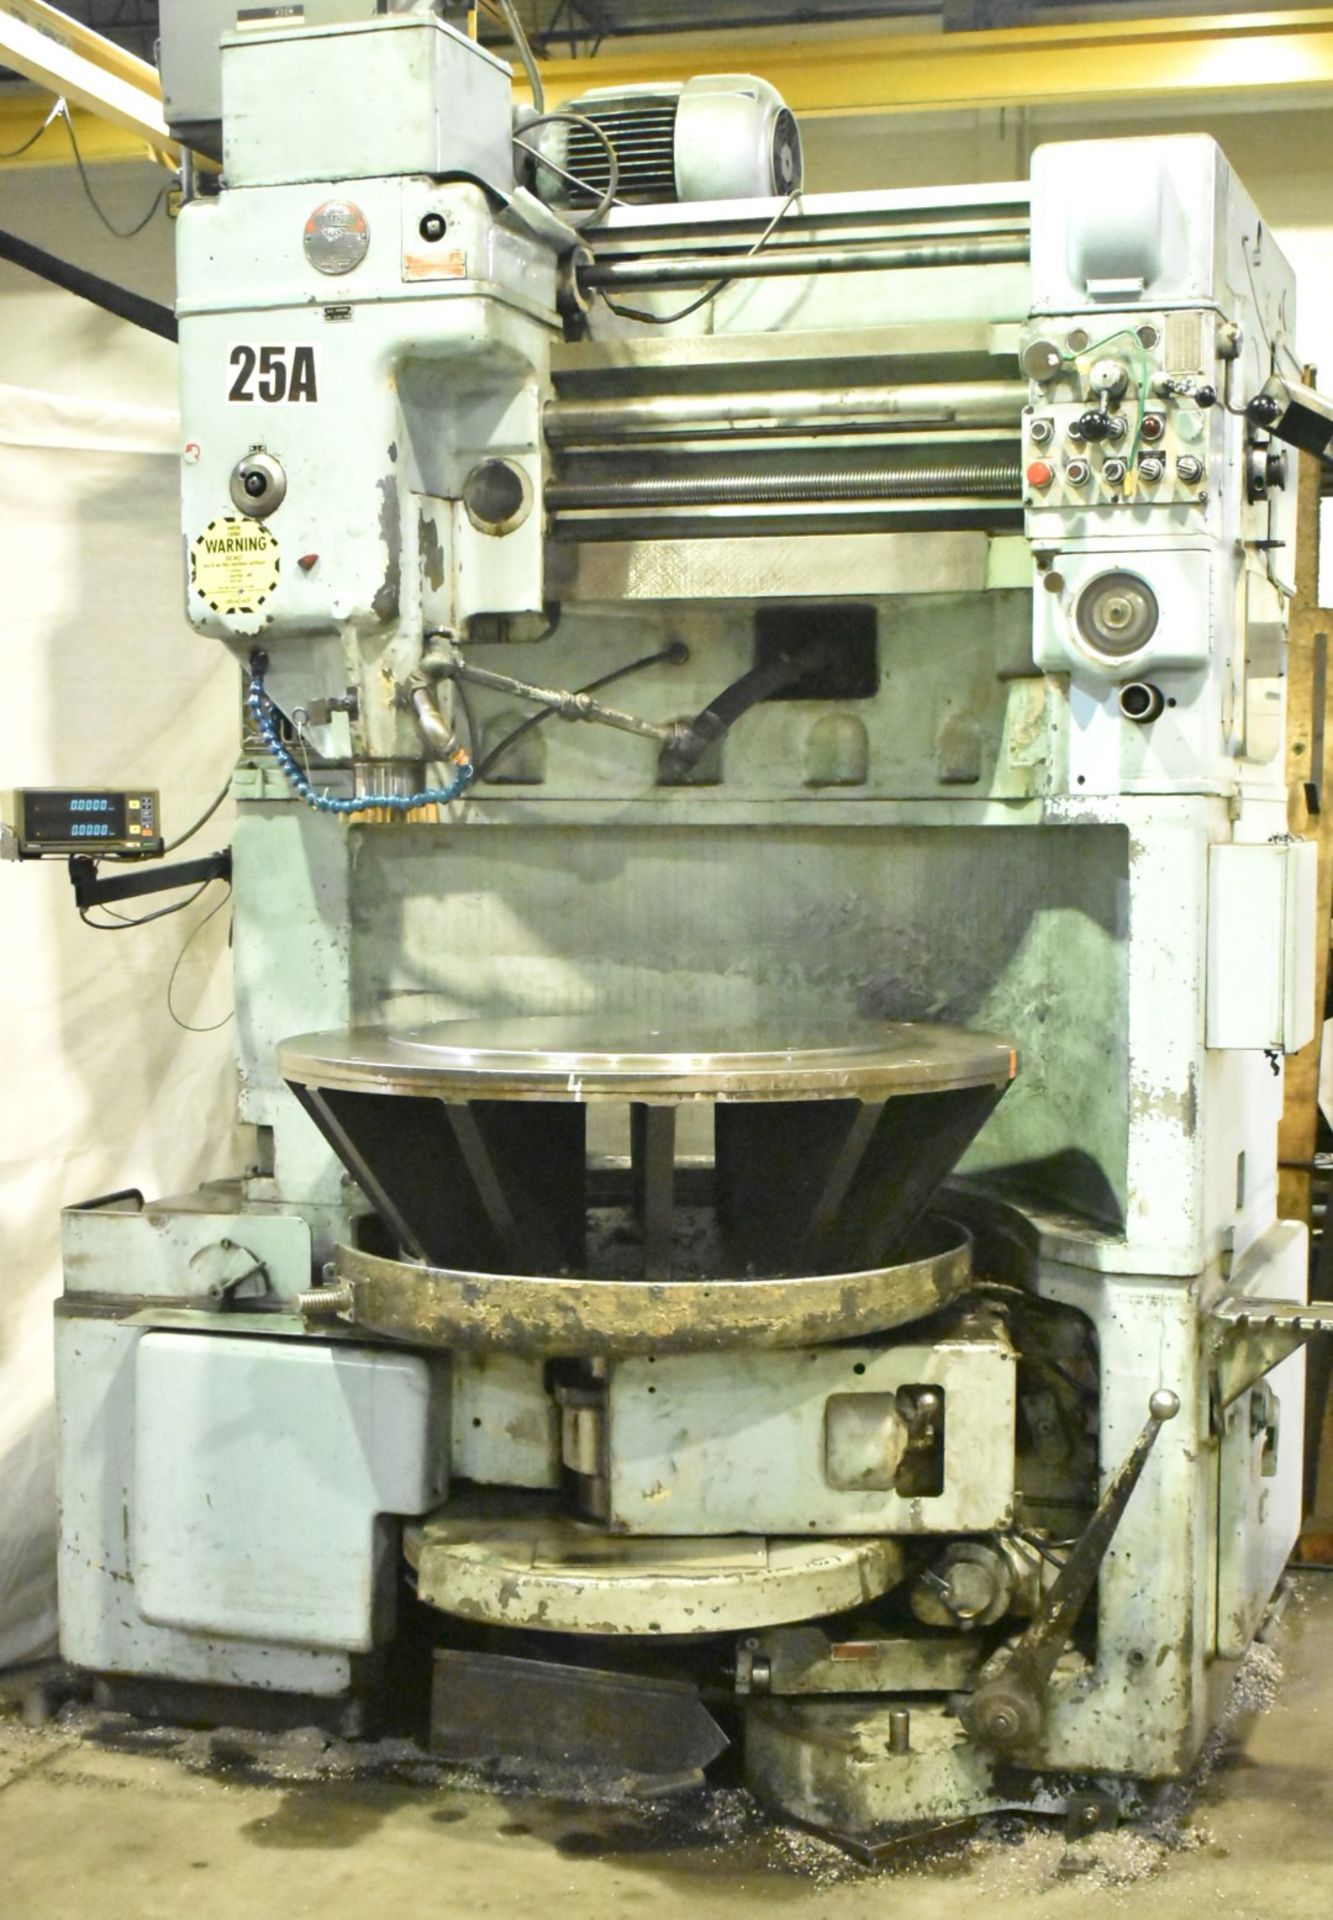 FELLOWS 36 TYPE VERTICAL GEAR SHAPER WITH 47" DIAMETER TABLE, APPROX. 16" MAX. DISTANCE SPINDLE NOSE